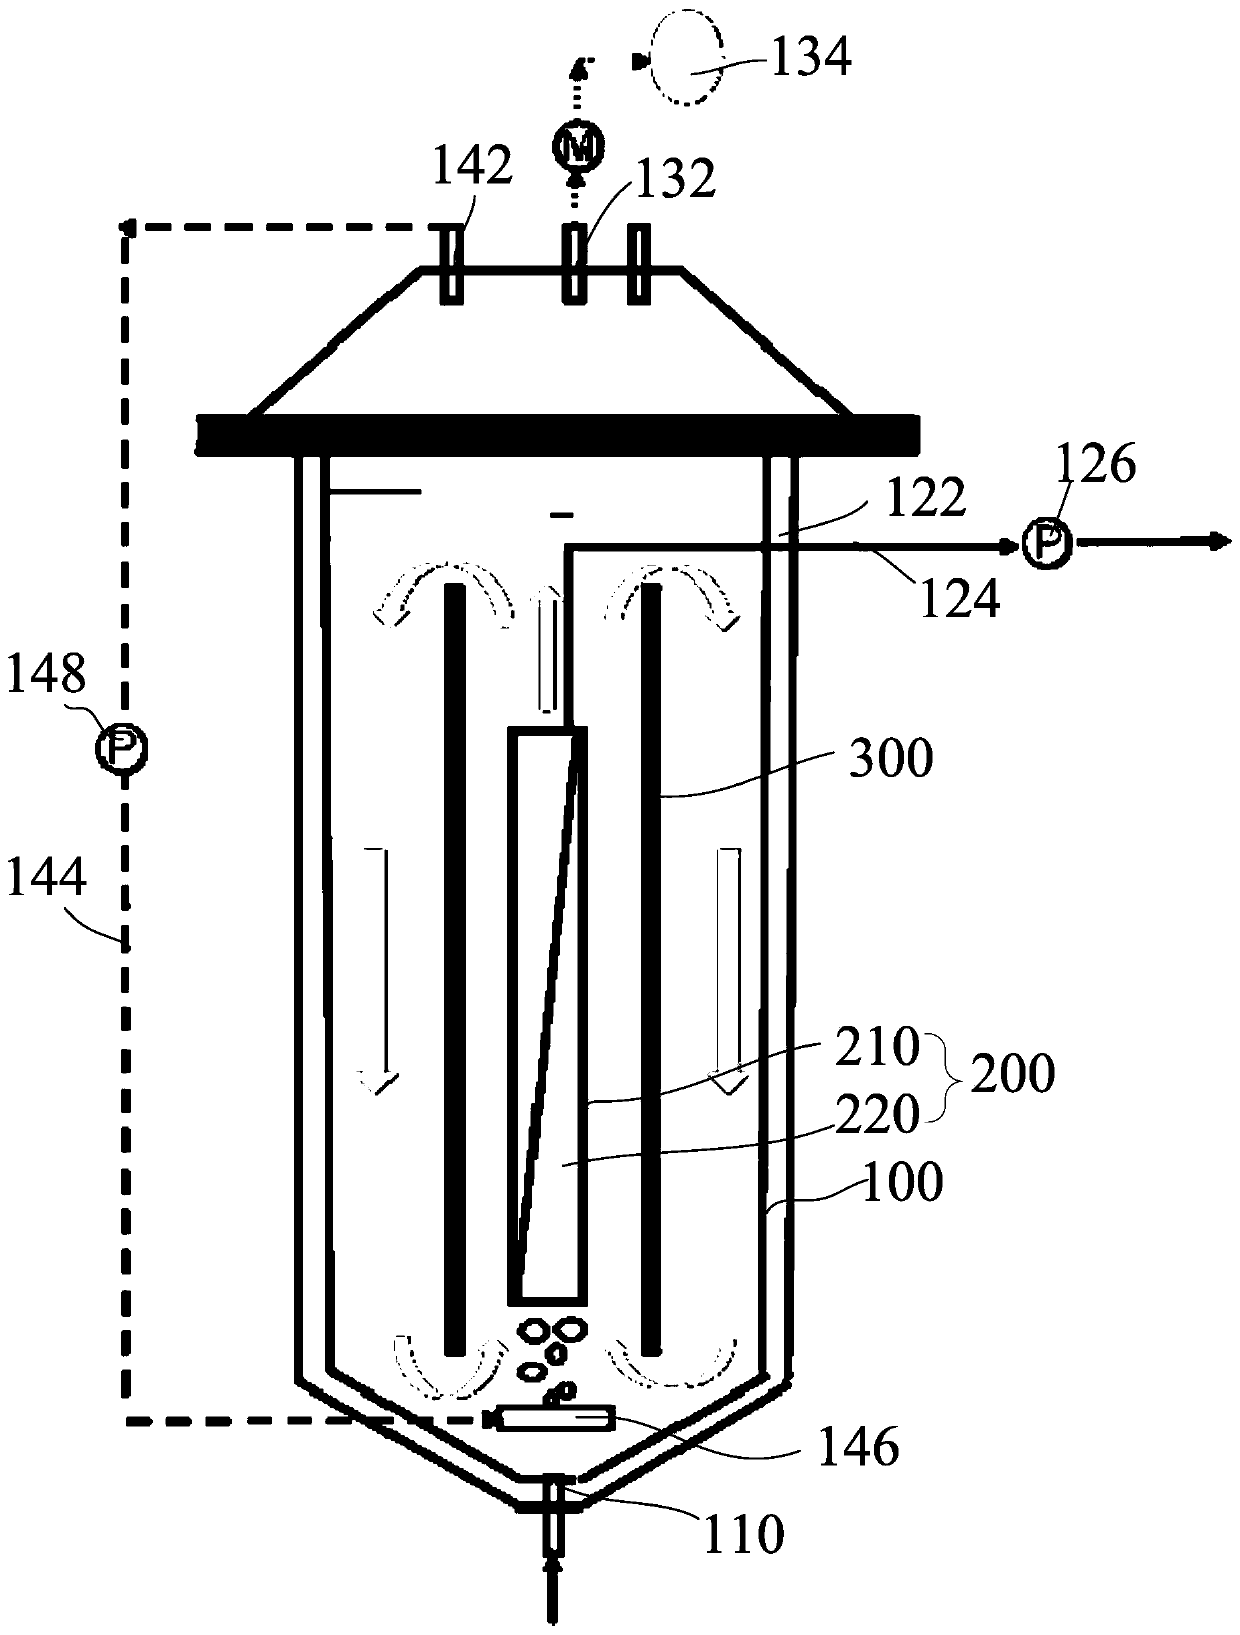 Anaerobic membrane bioreactor and application thereof in sewage treatment